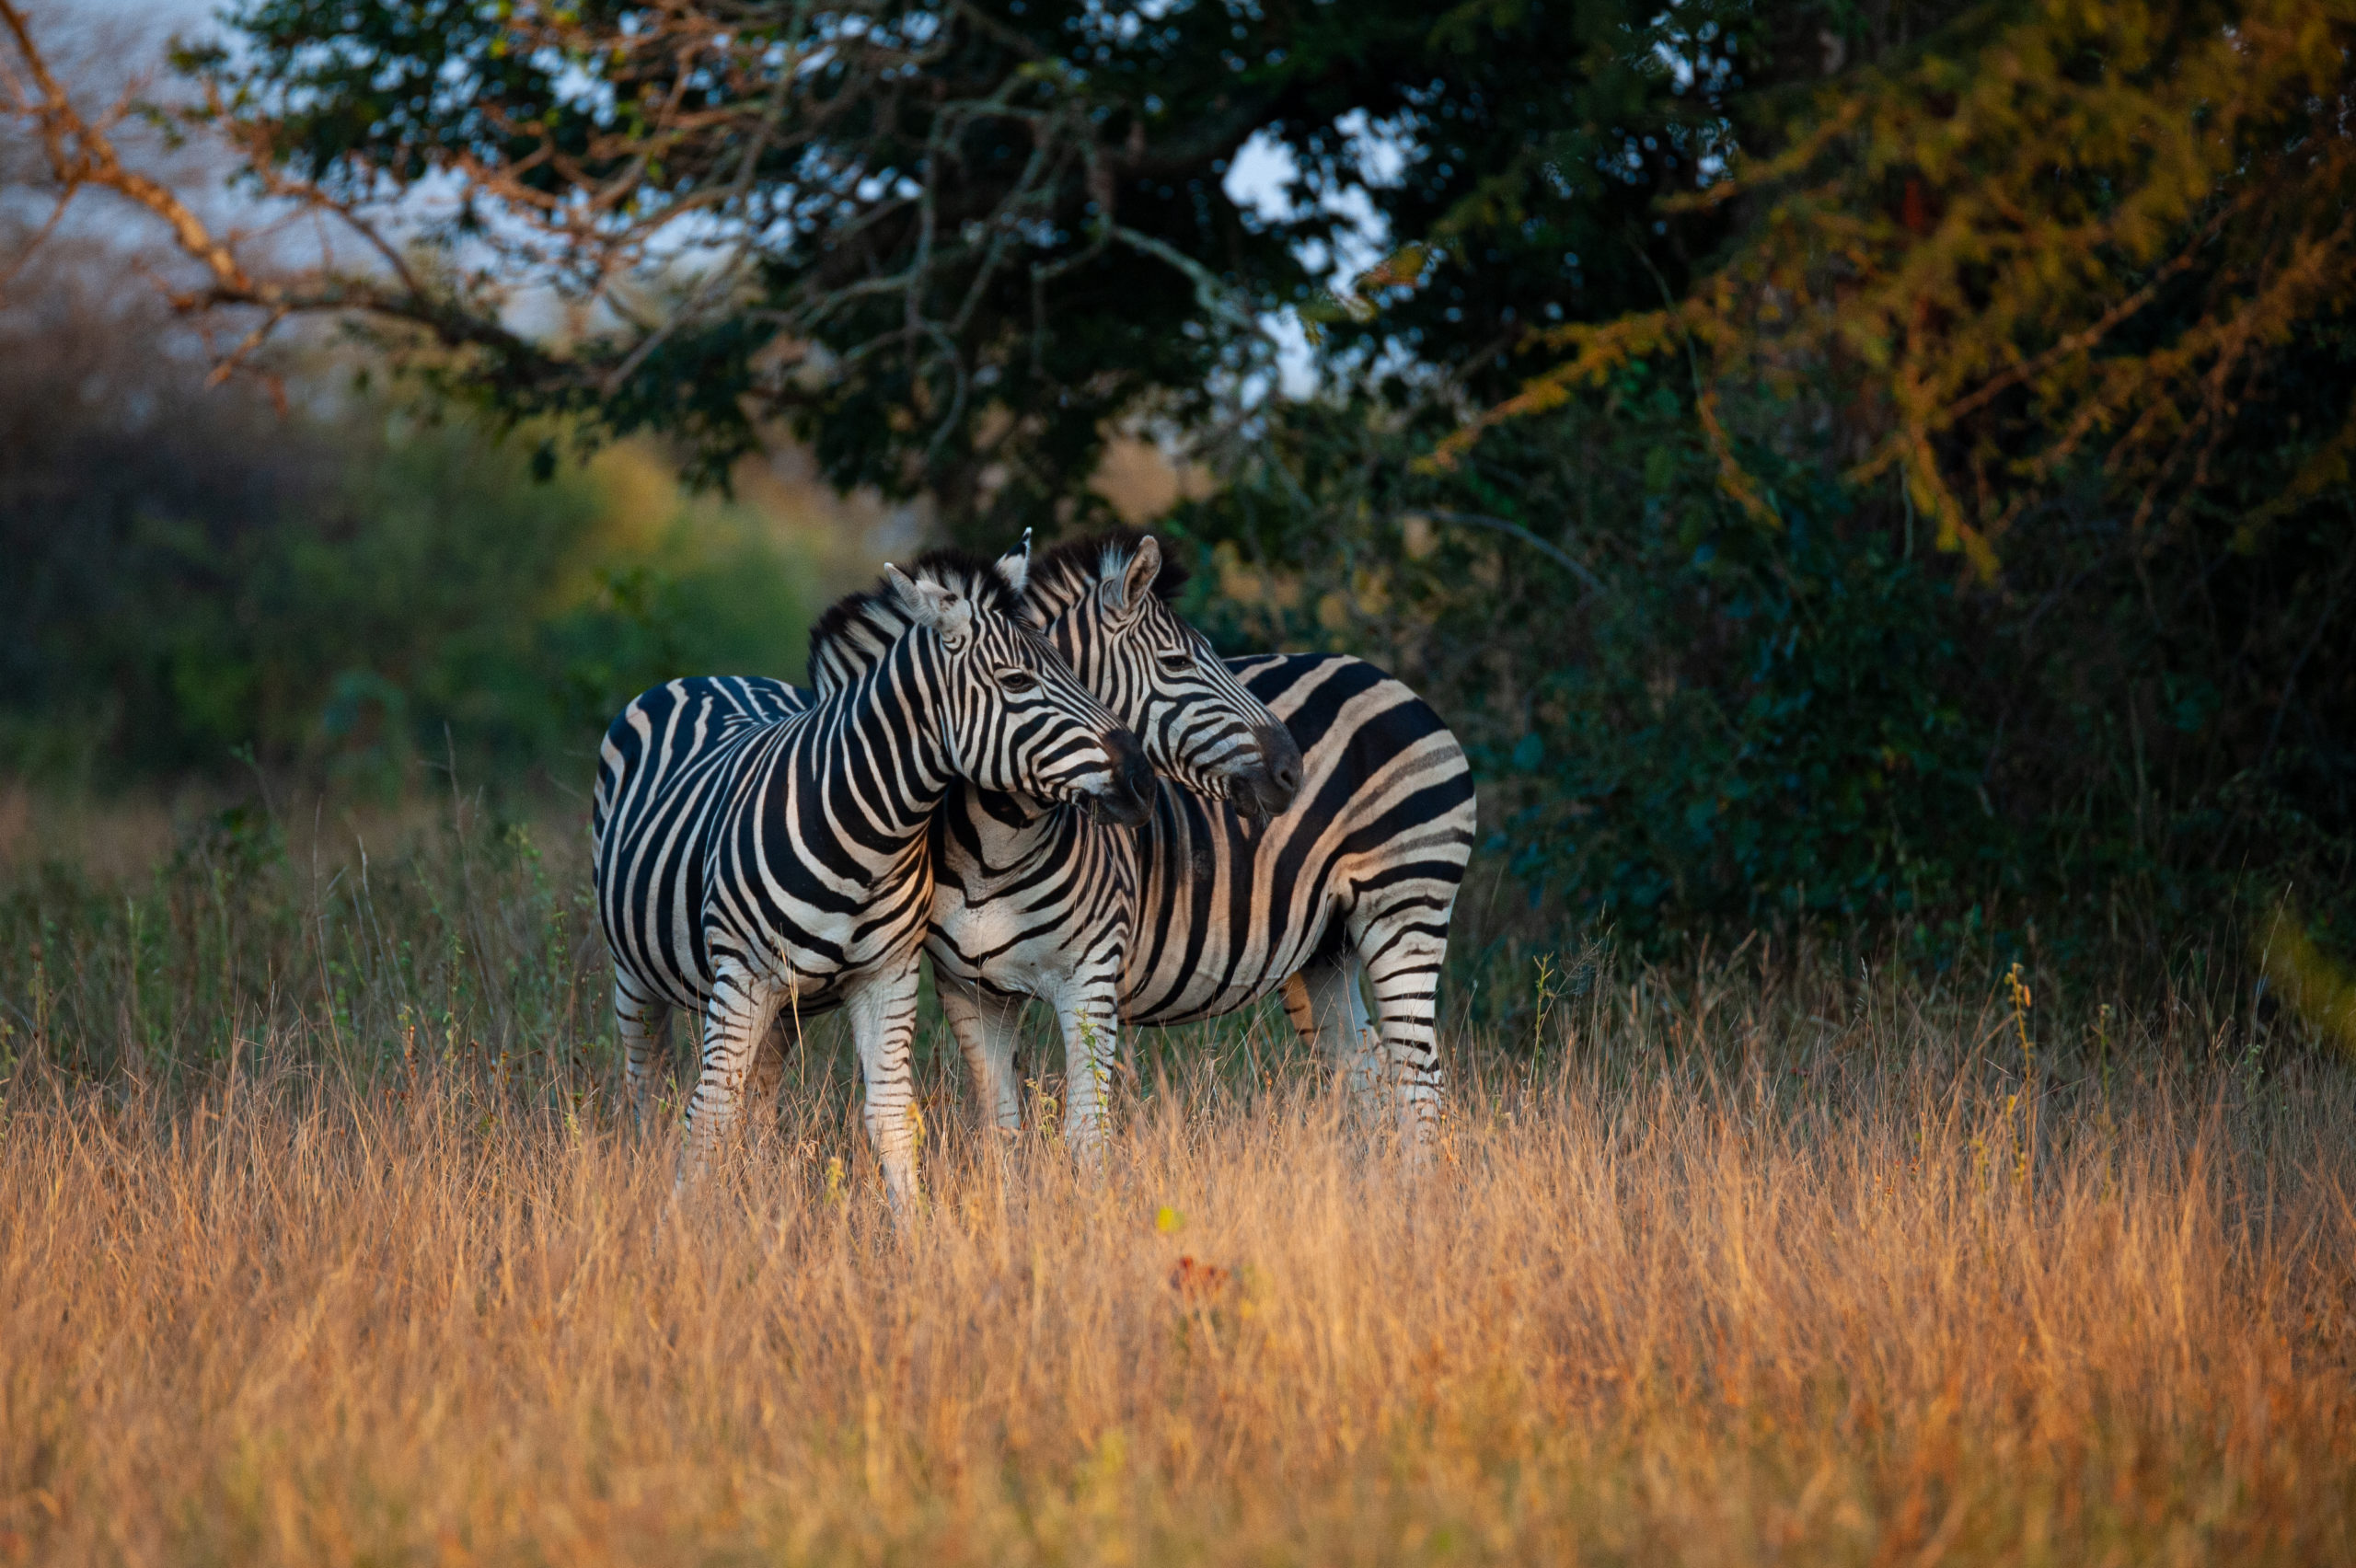 Witness beautiful creatures like these wild zebras in the Eastern Cape, South Africa, when you take a tailor-made holiday with Alfred&.